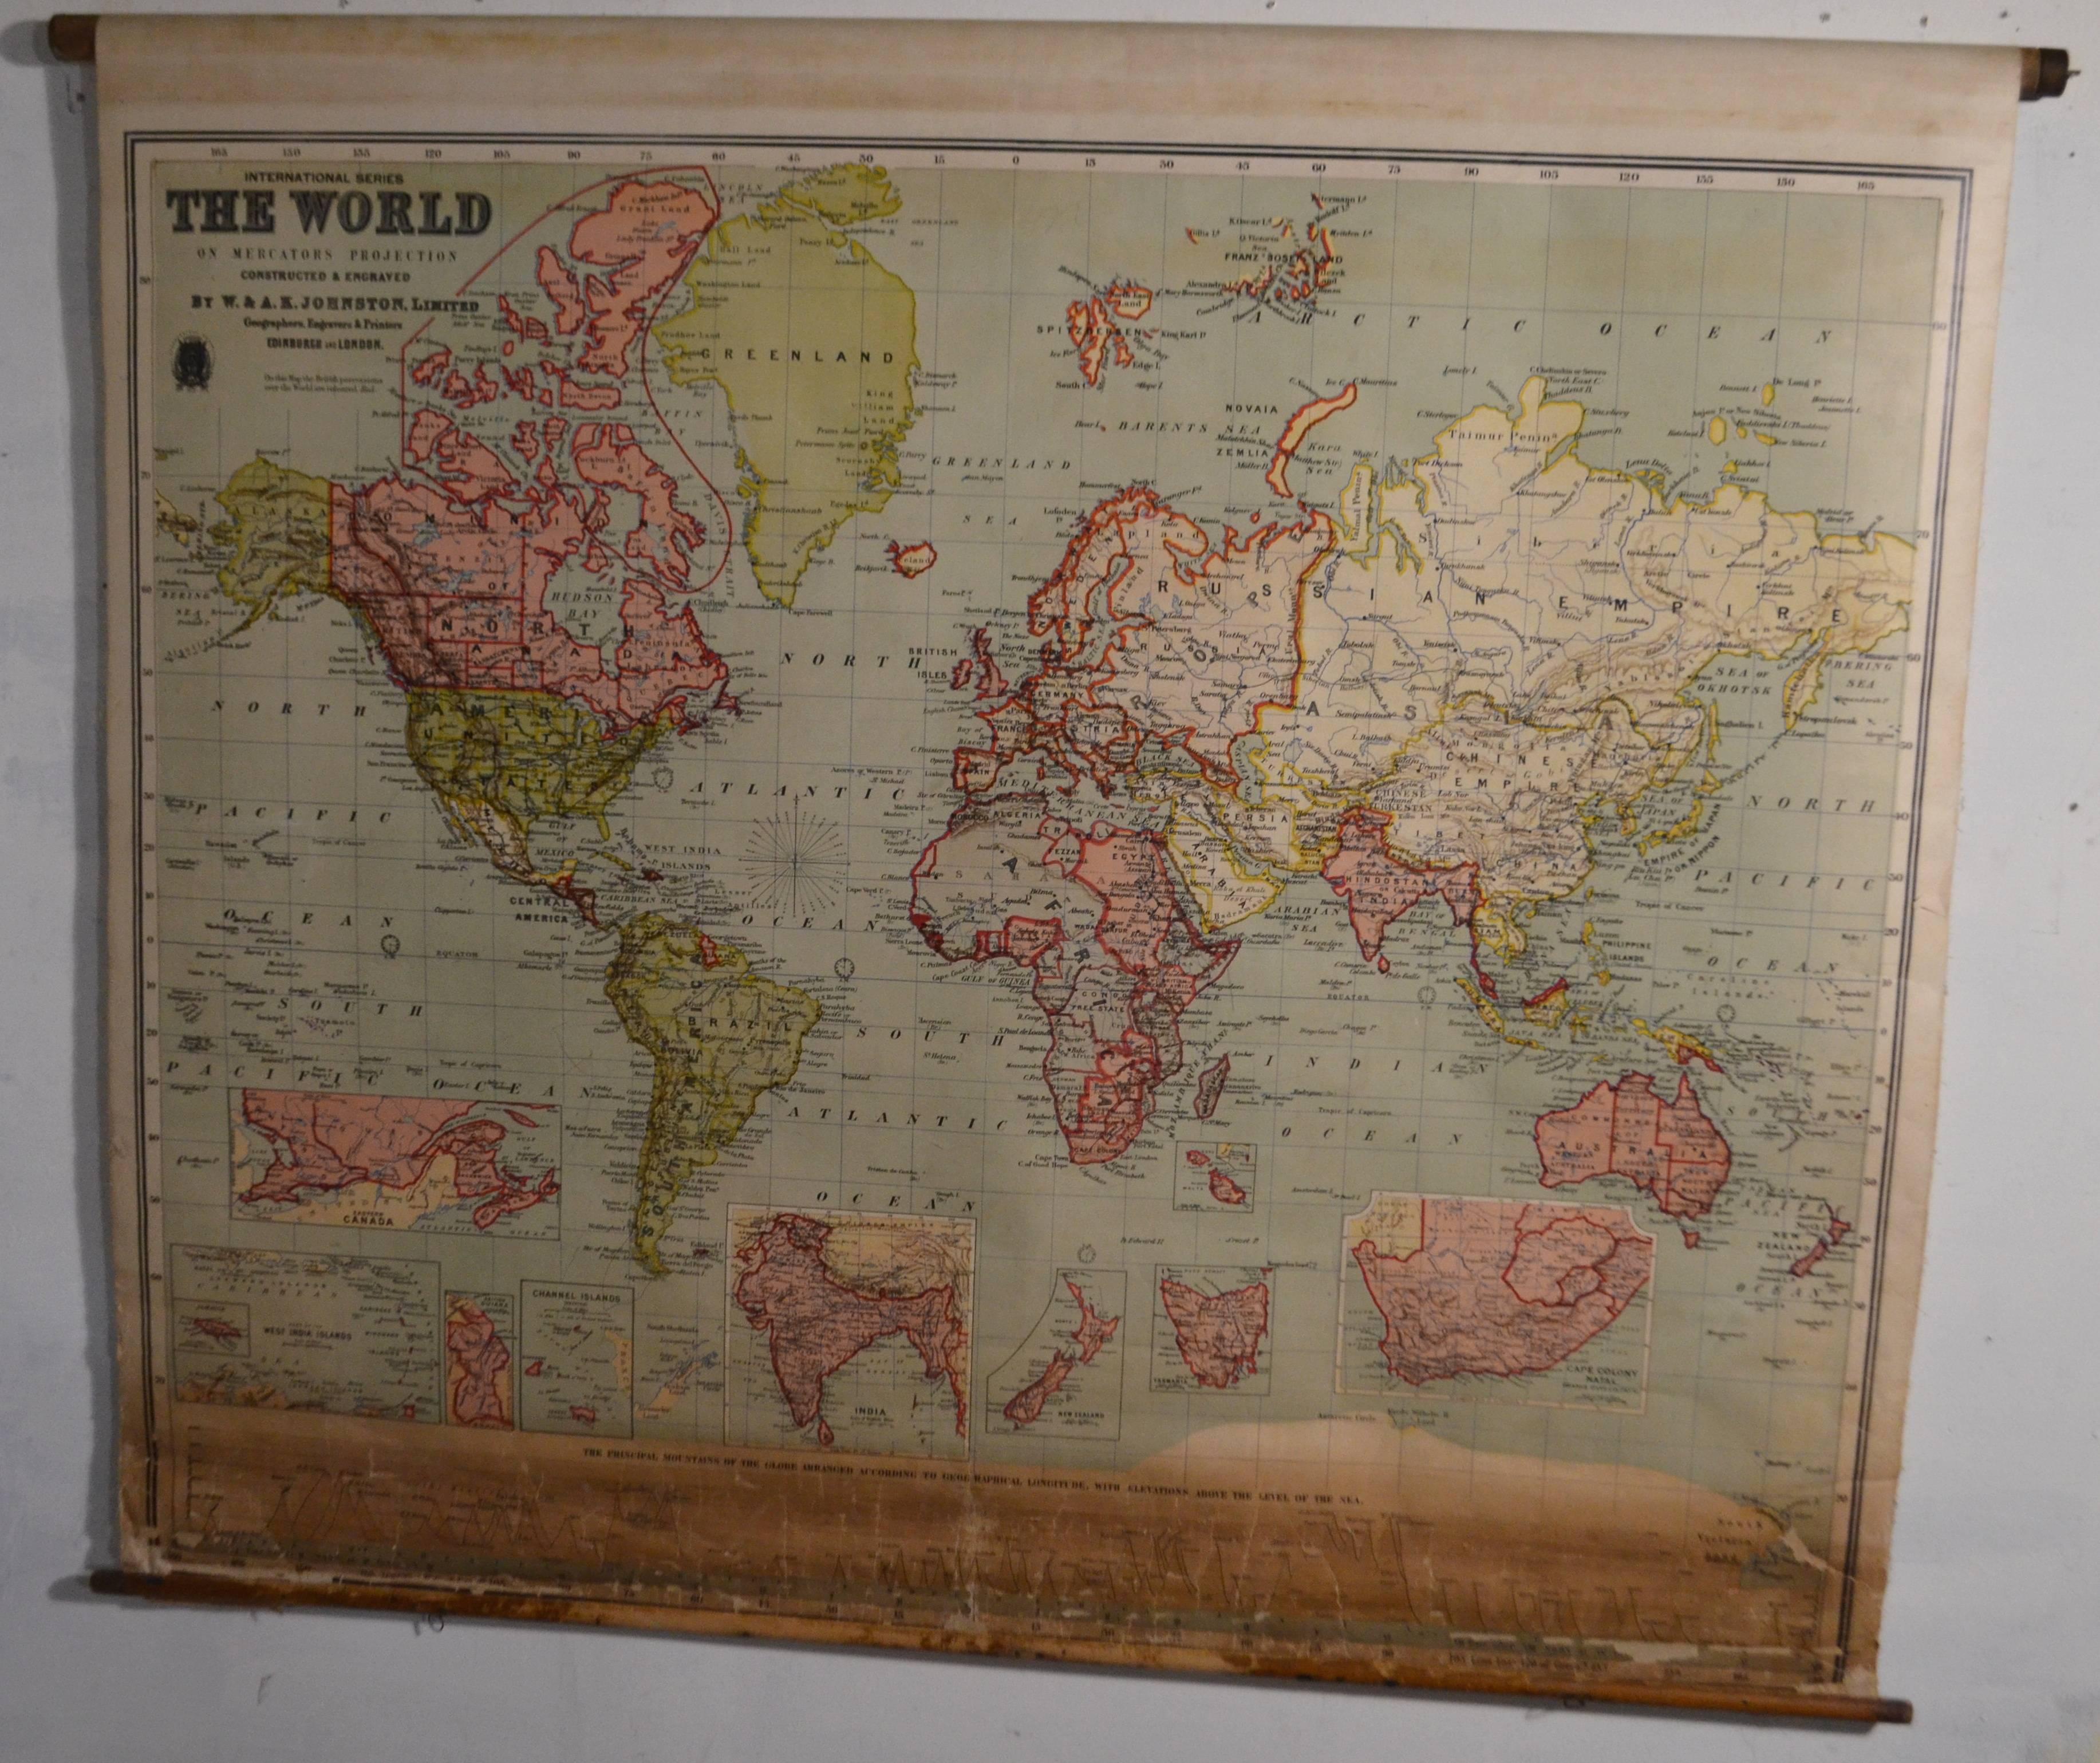 Early 20th century map of the world engraved and printed in Edinburgh, Scotland. Mounted on retractable wooden roller. A classic archival map of the world before two catastrophic world wars broke up the empires of England, Russia and China.